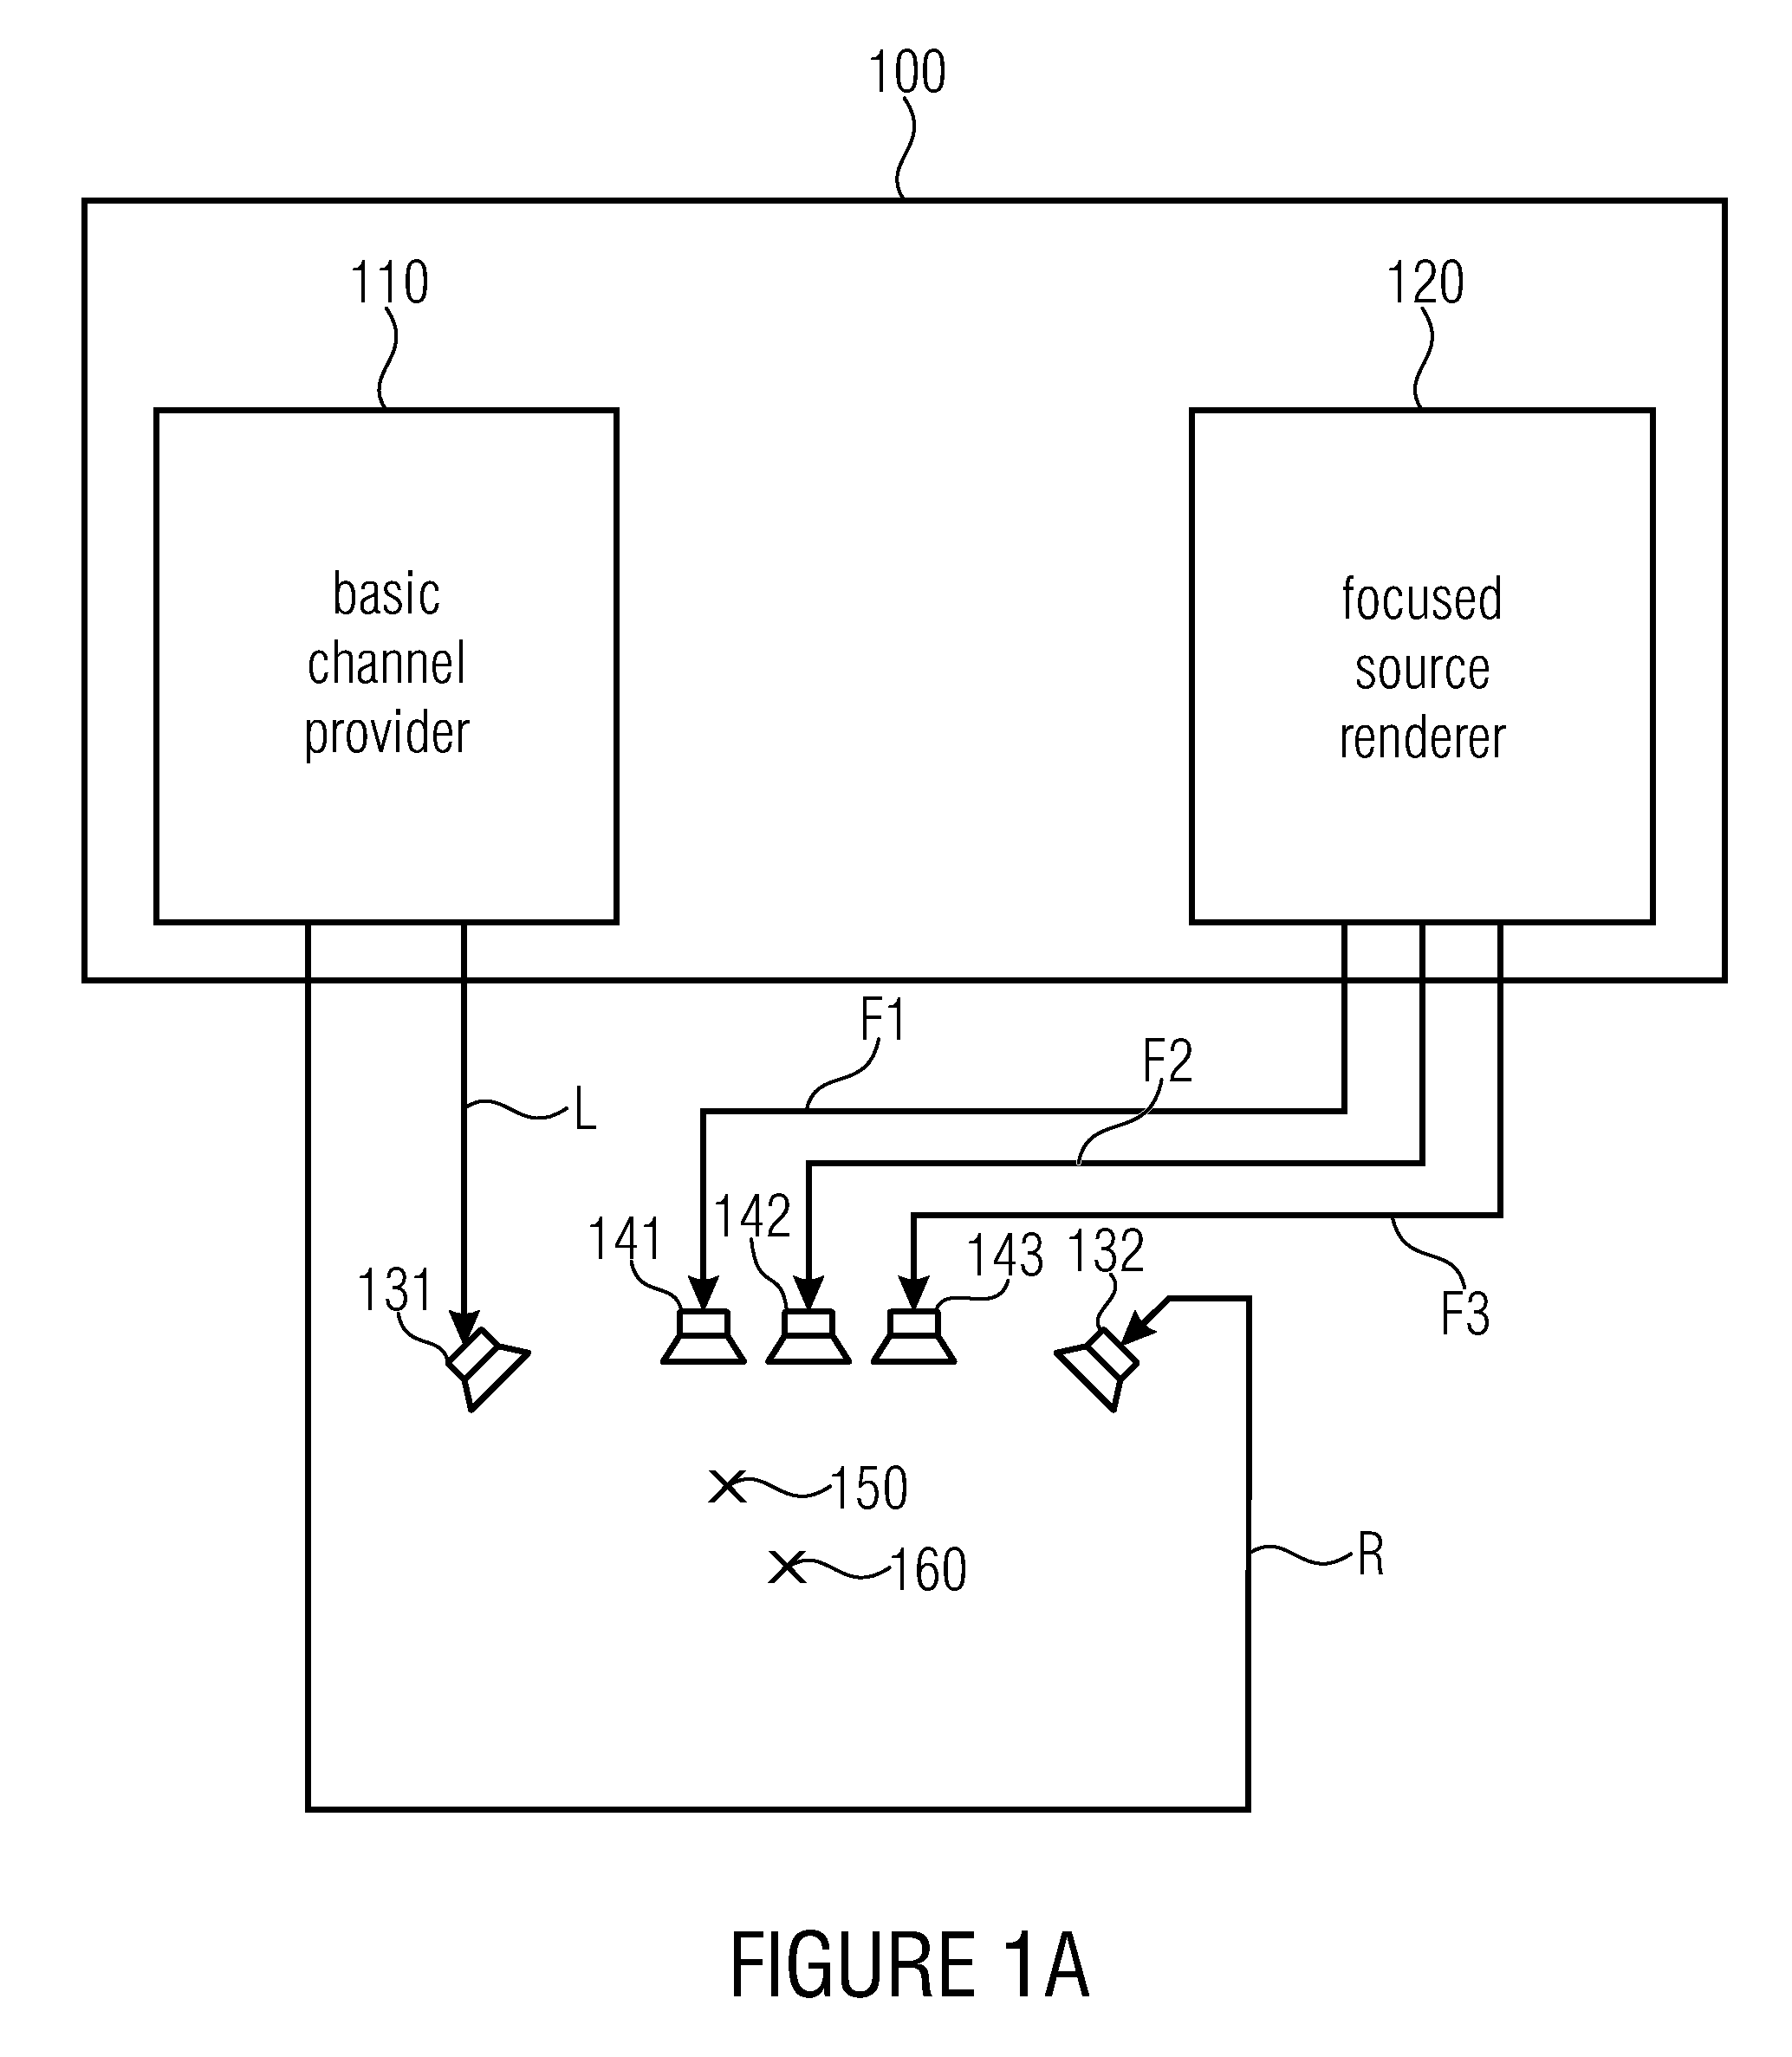 Apparatus and method for creating proximity sound effects in audio systems